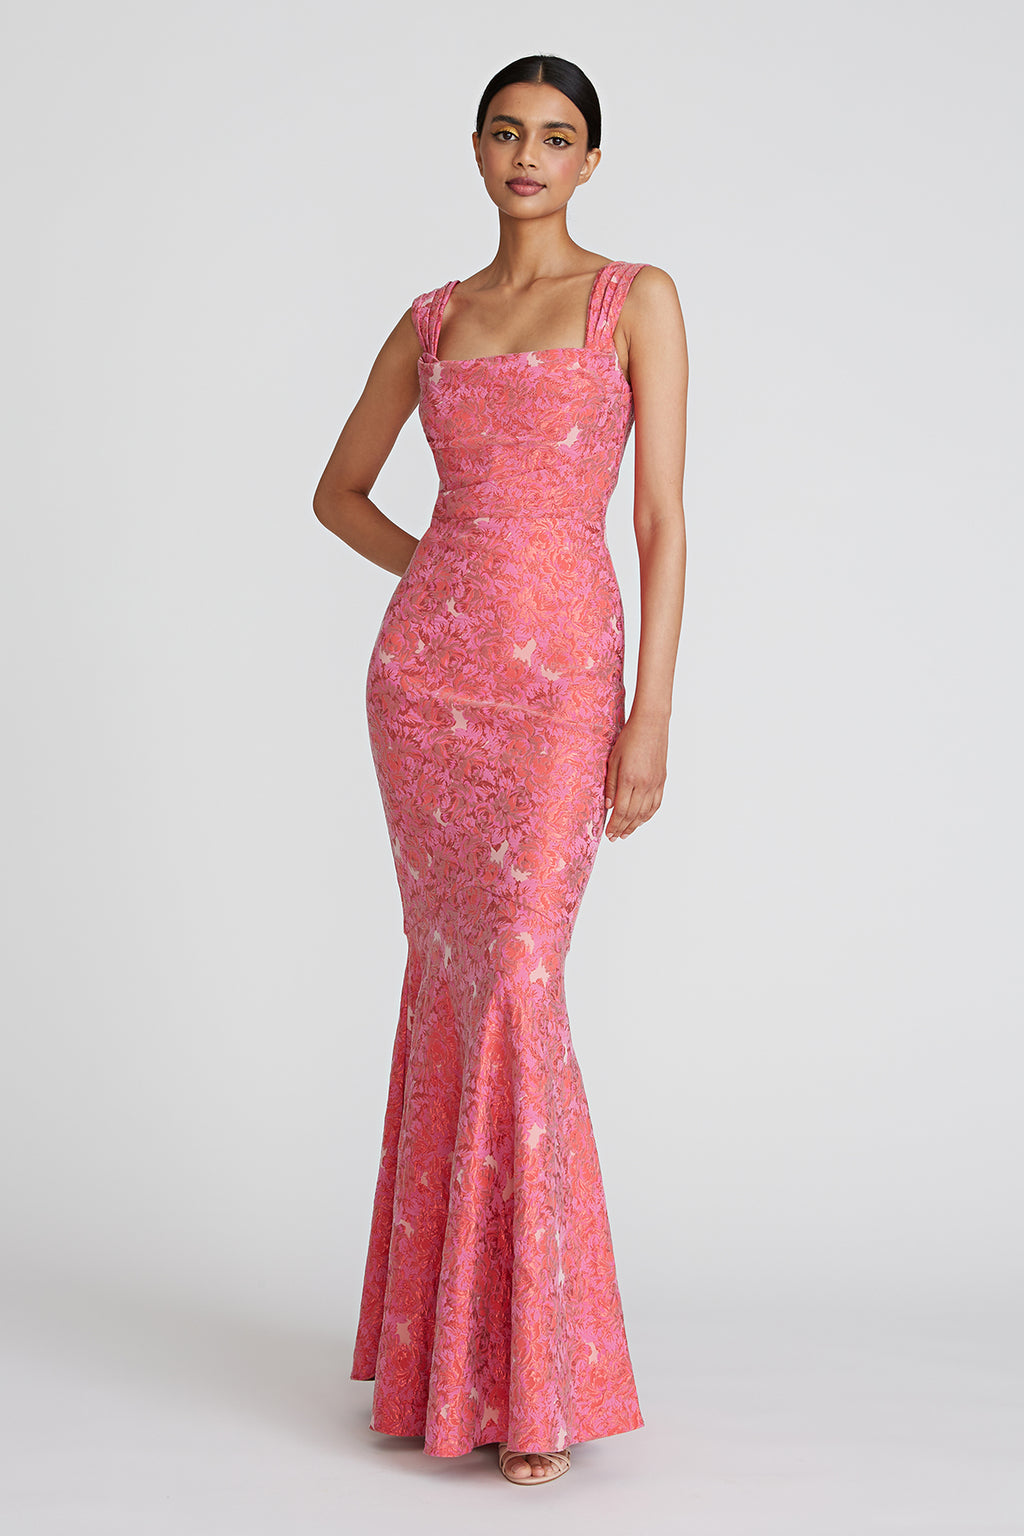 THEIA - Sabrina Fit And Flare Gown in Poppy